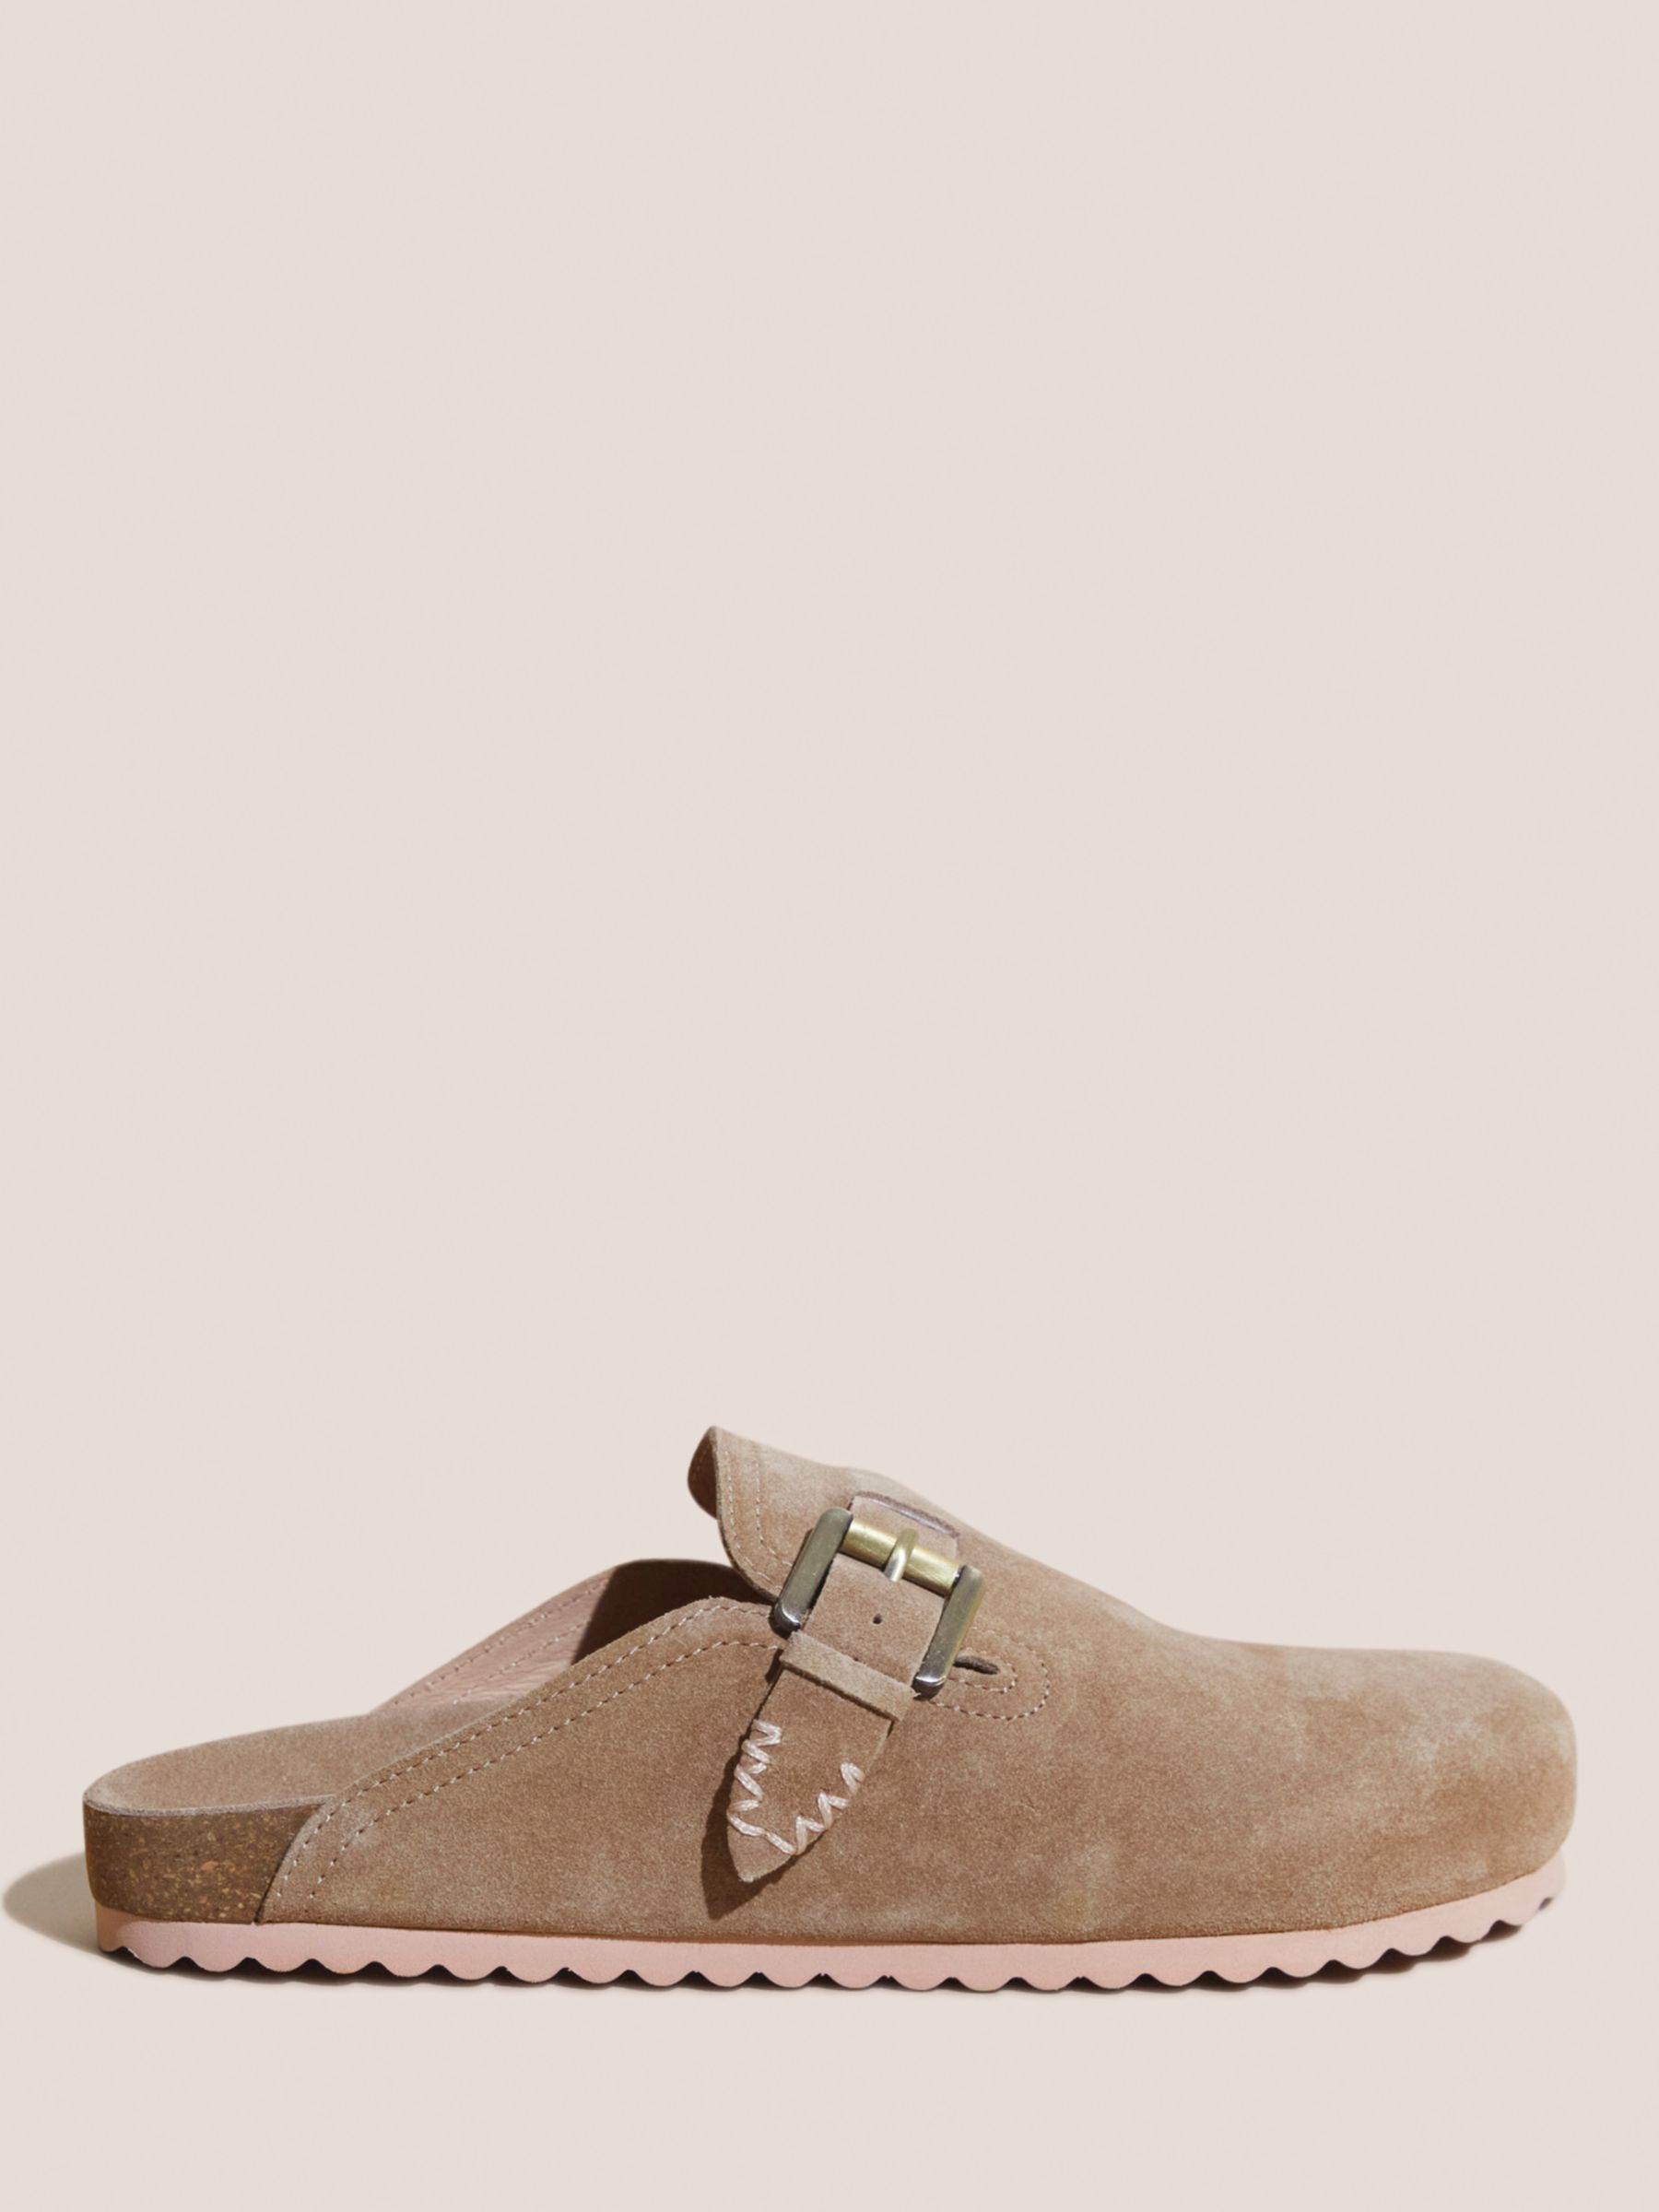 White Stuff Suede Footbed Mules, Natural at John Lewis & Partners